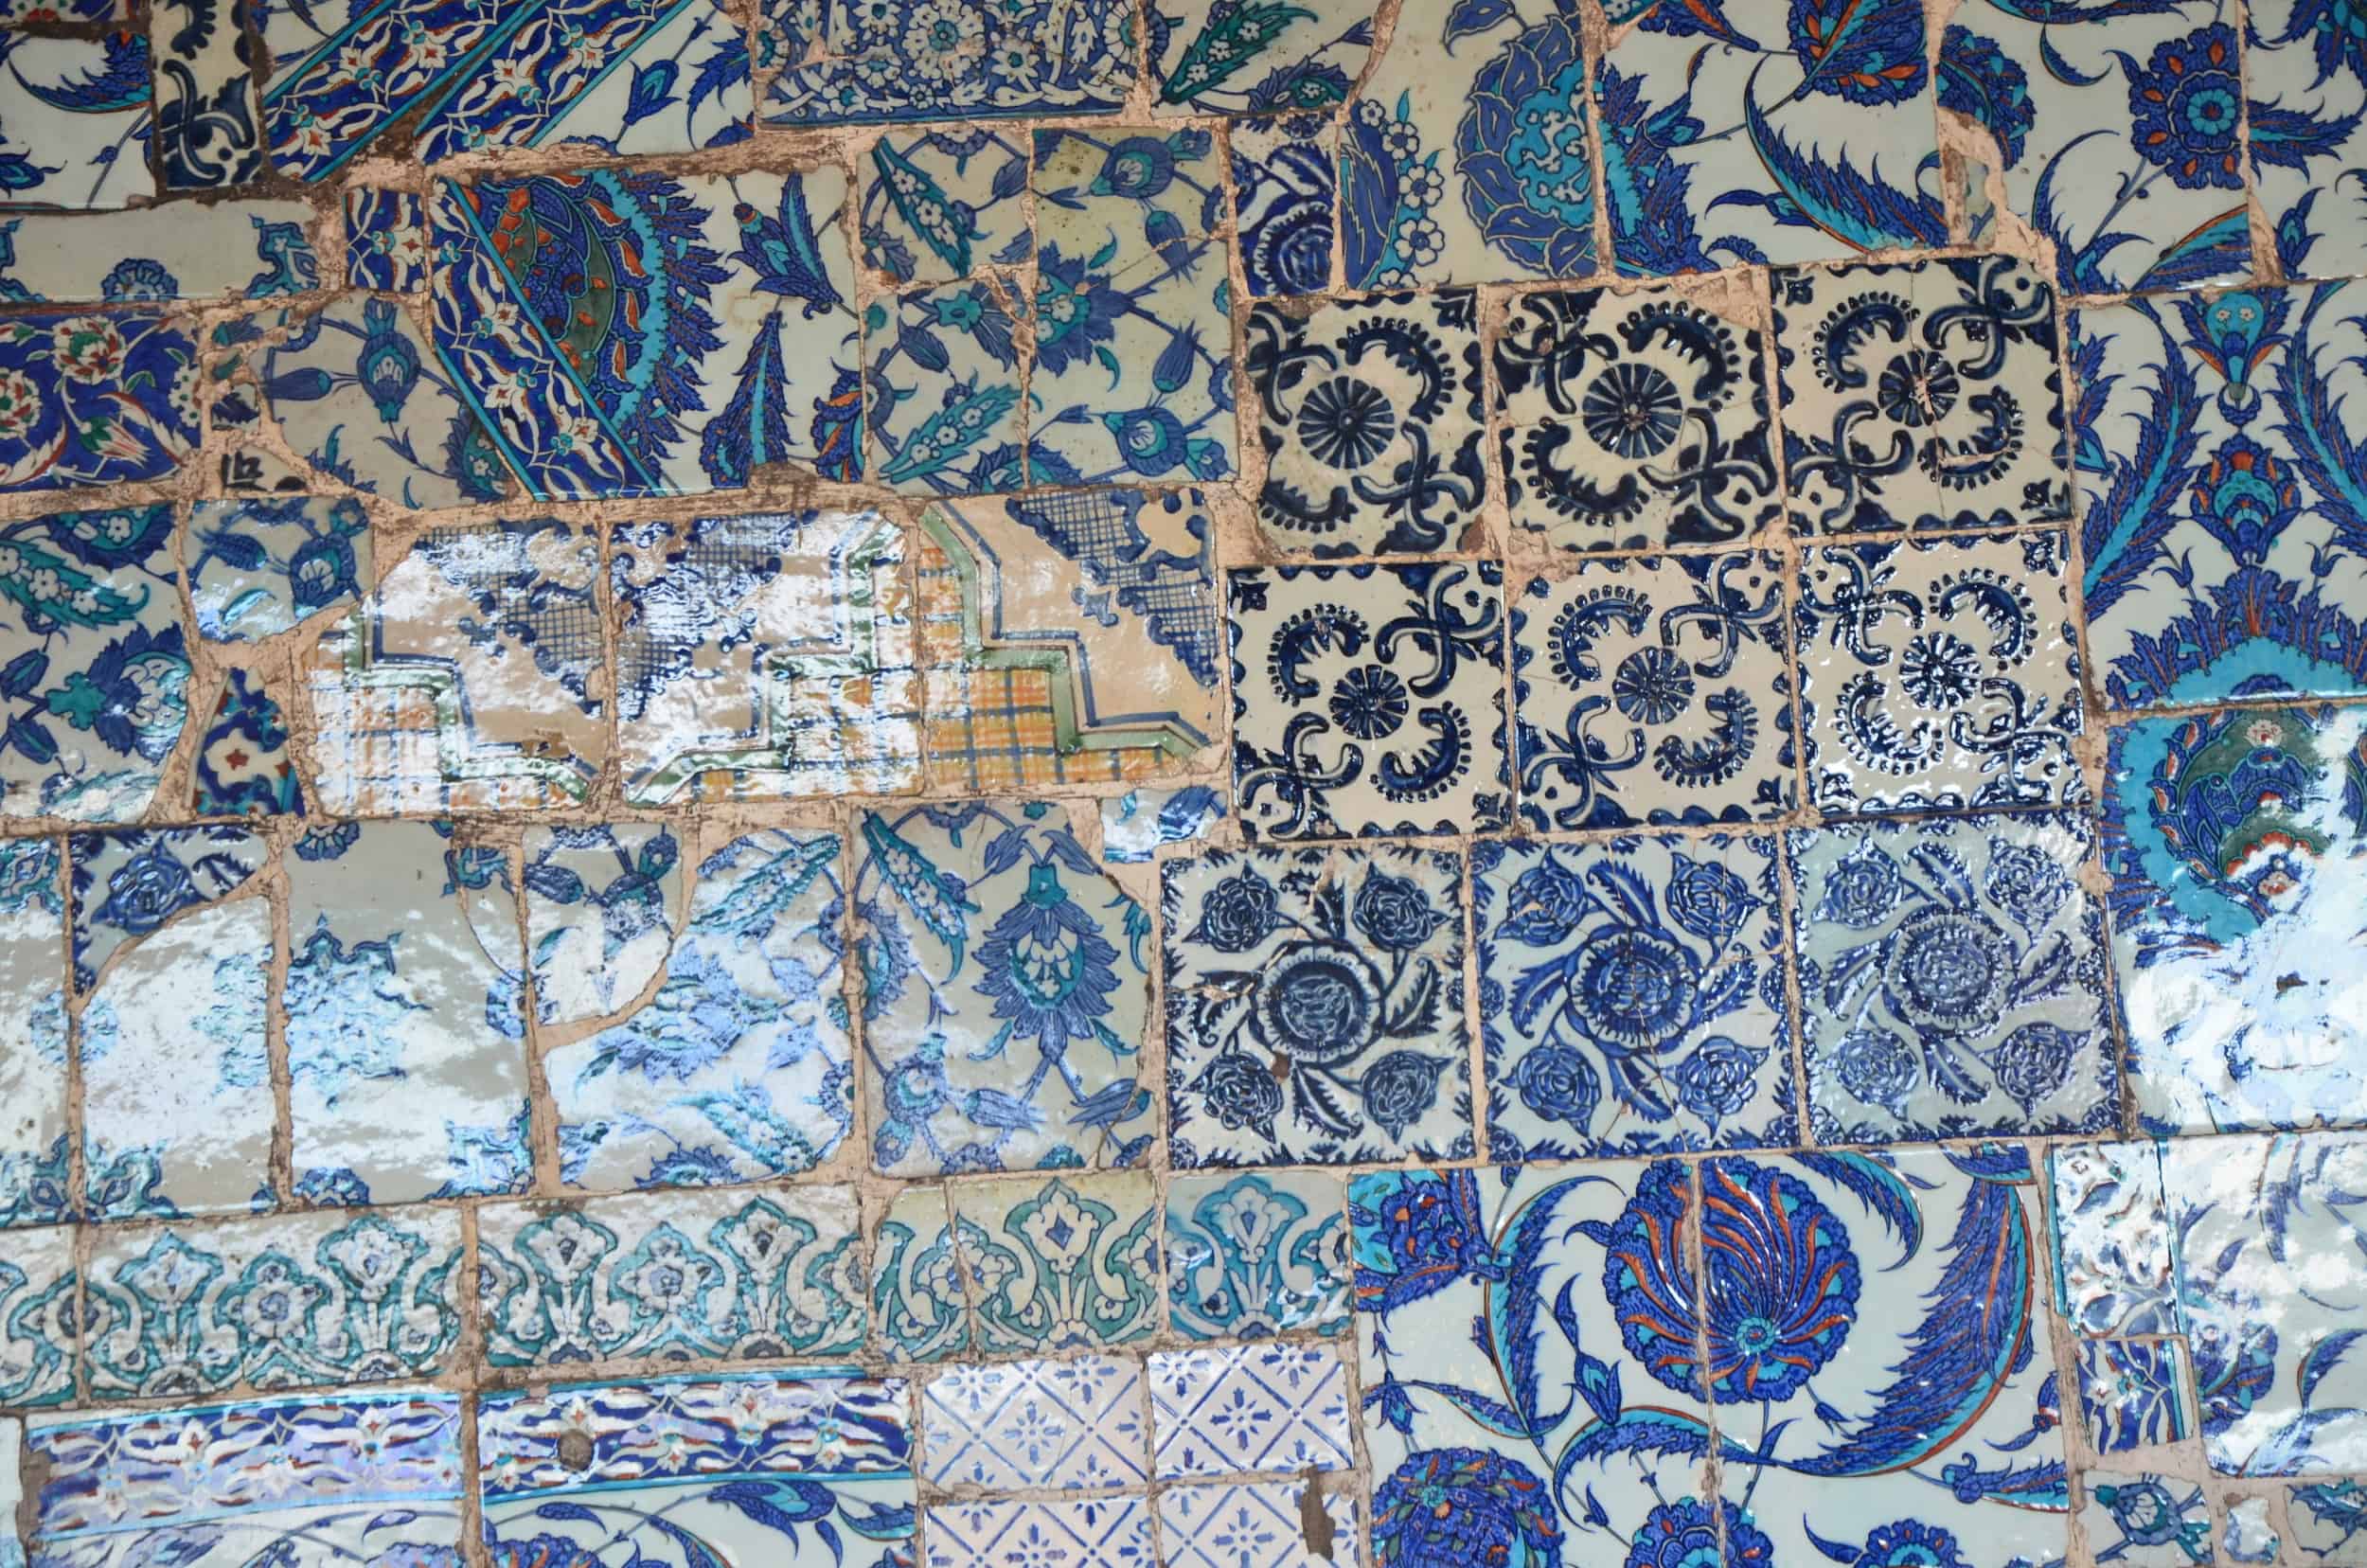 Iznik tiles on the inner porch at the Rüstem Pasha Mosque in Istanbul, Turkey